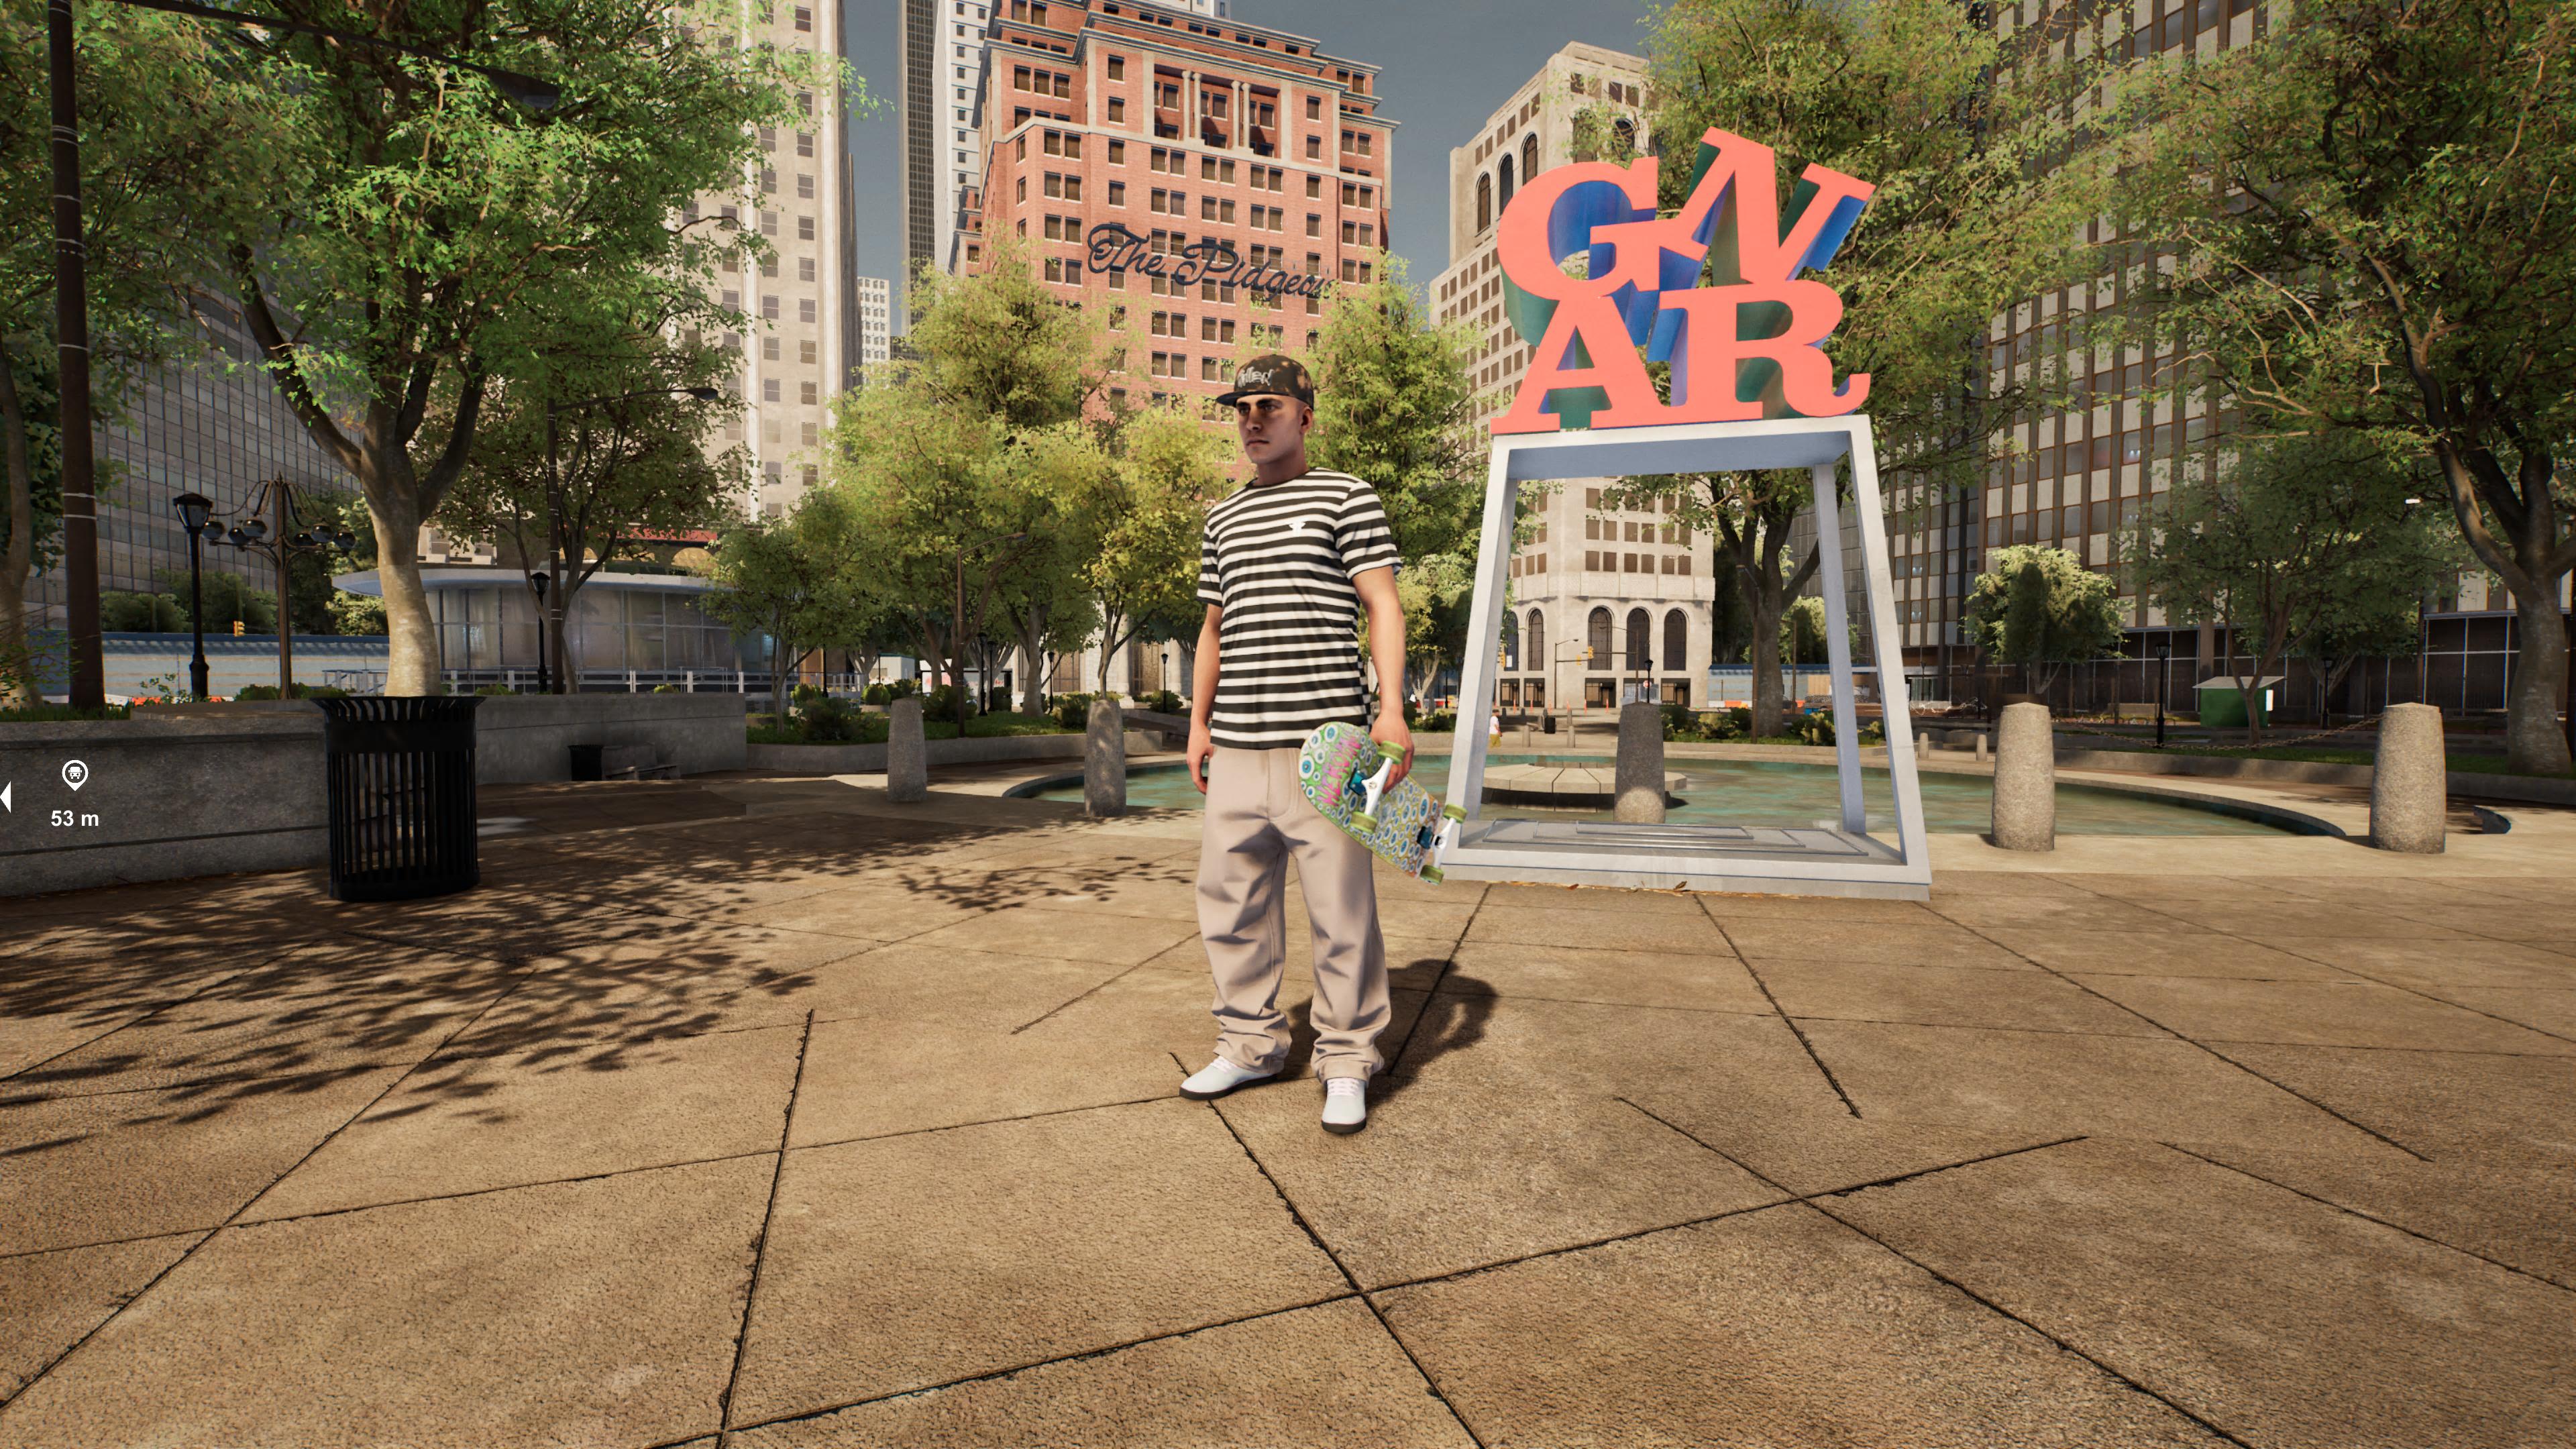 Session Skate Sim Review - Standing in a public square in rather drab grey